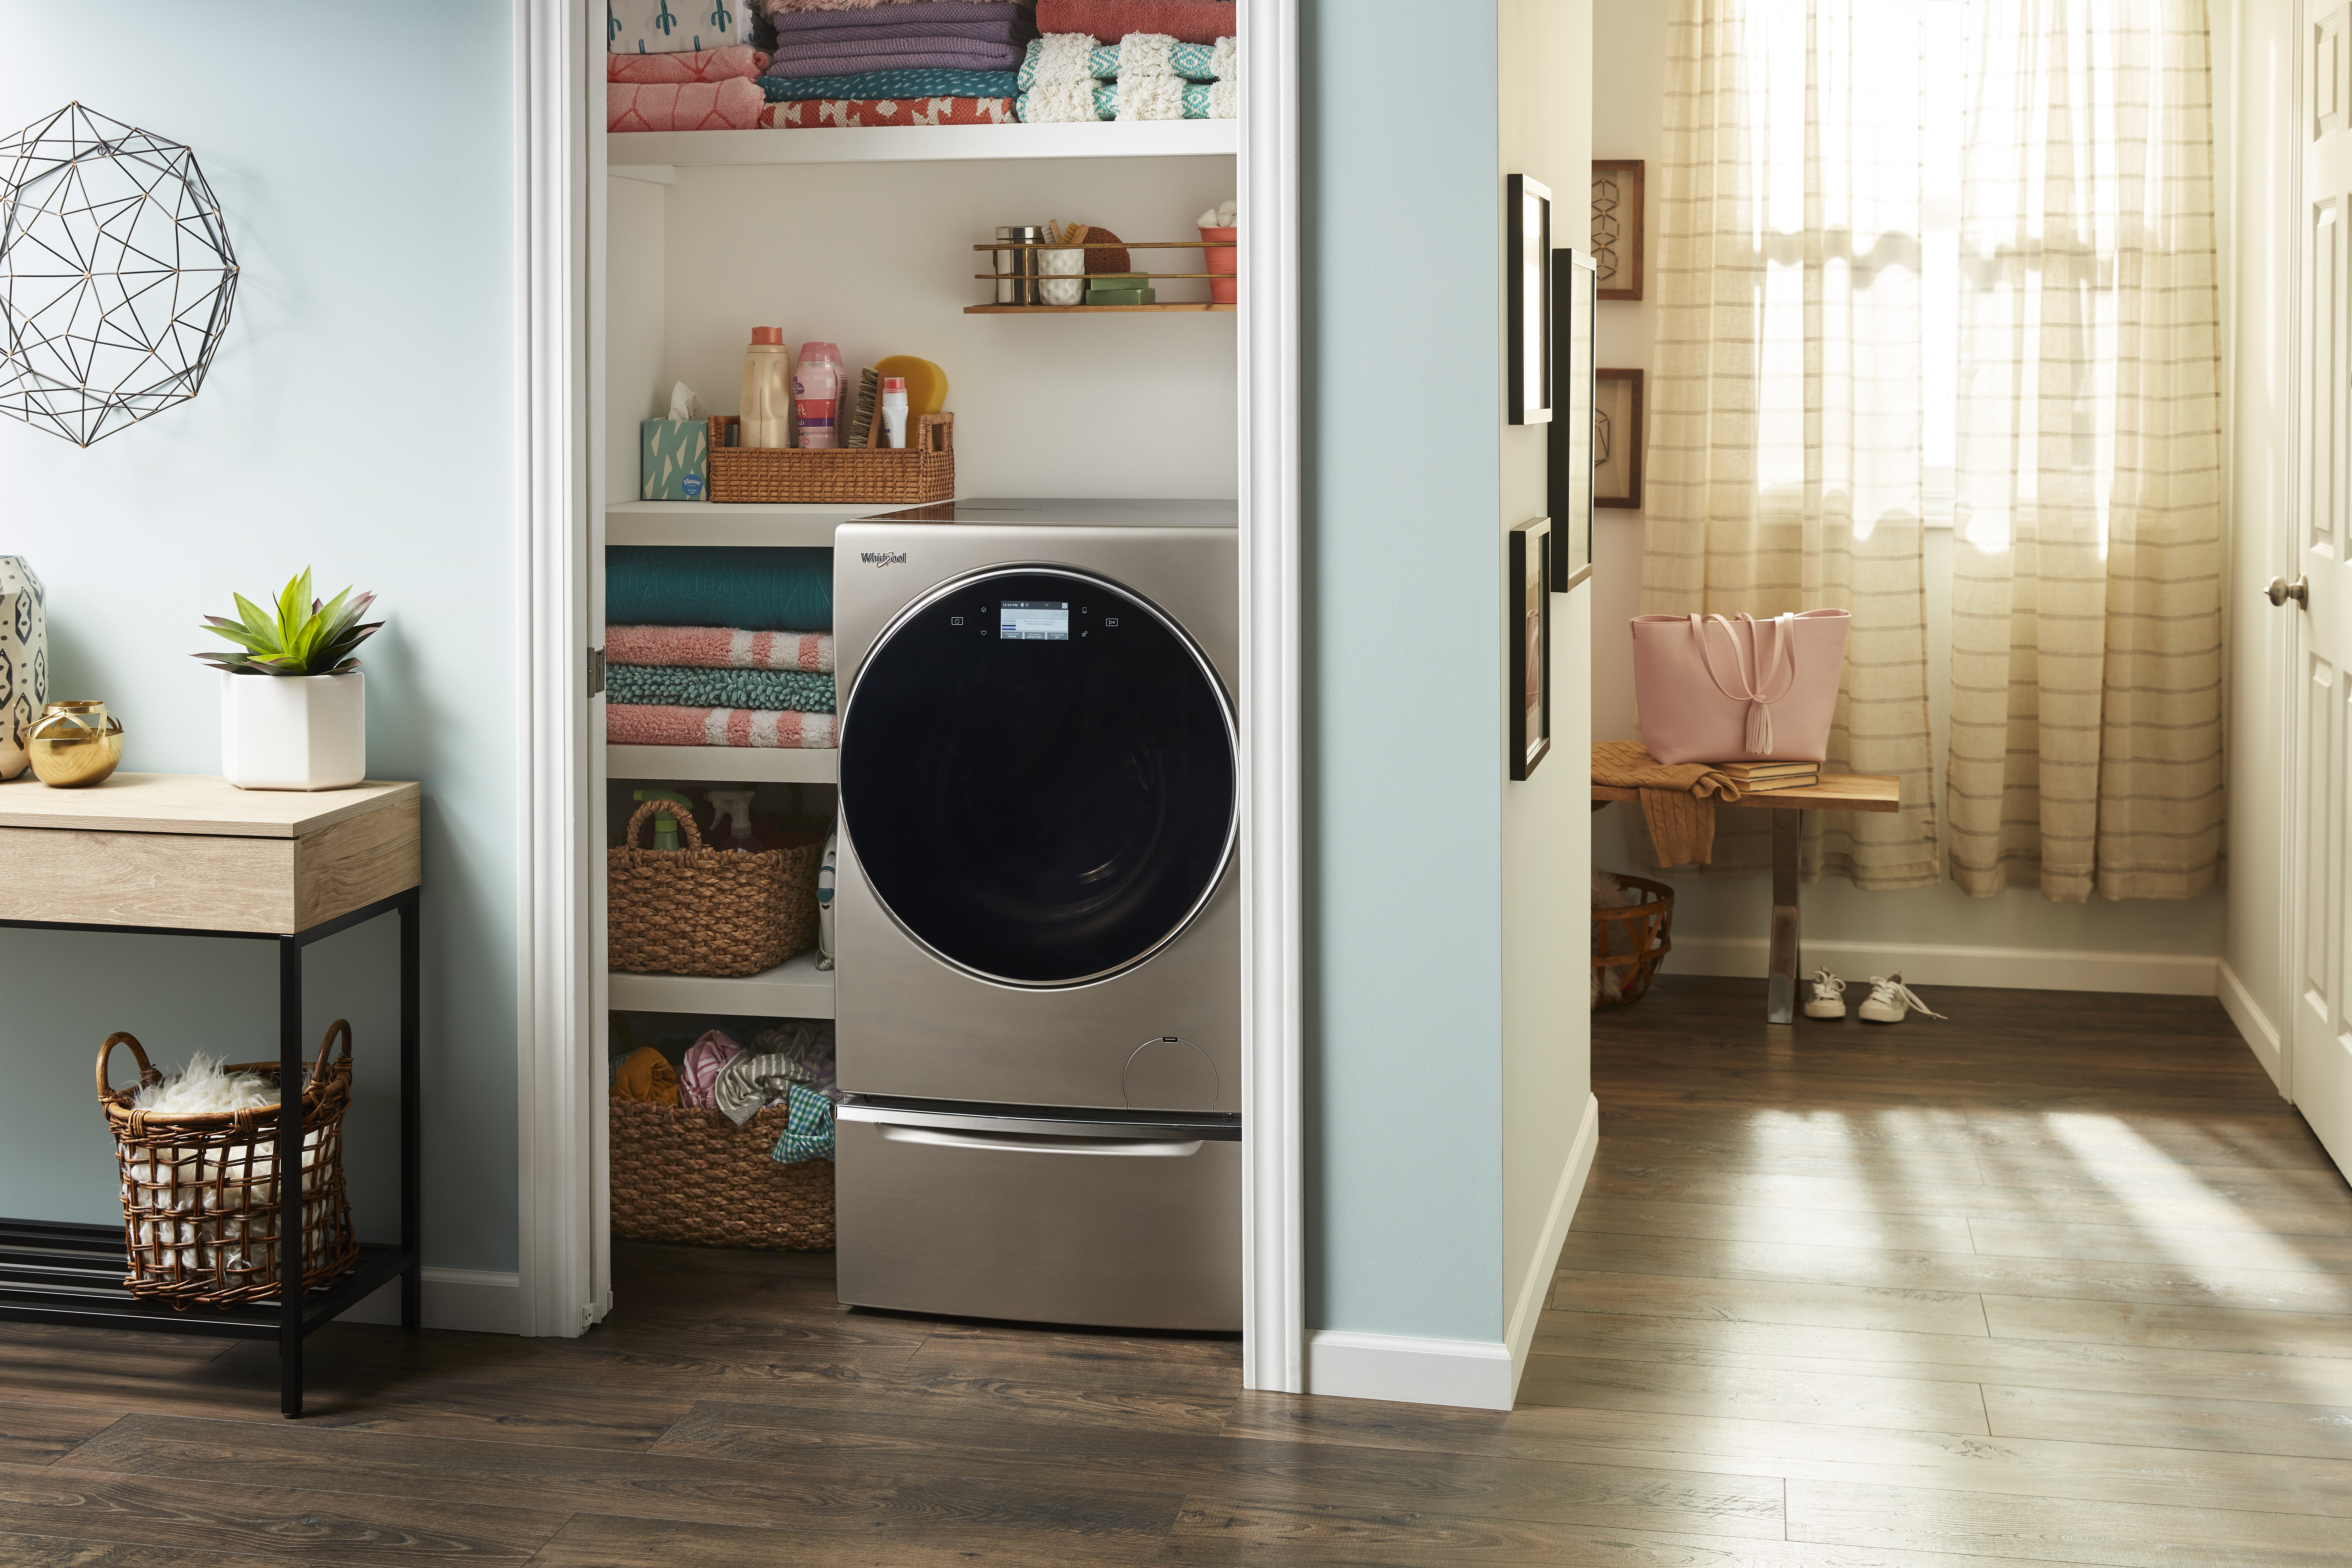 Top 7 Washer Dryer Combos for Small Spaces, East Coast Appliance